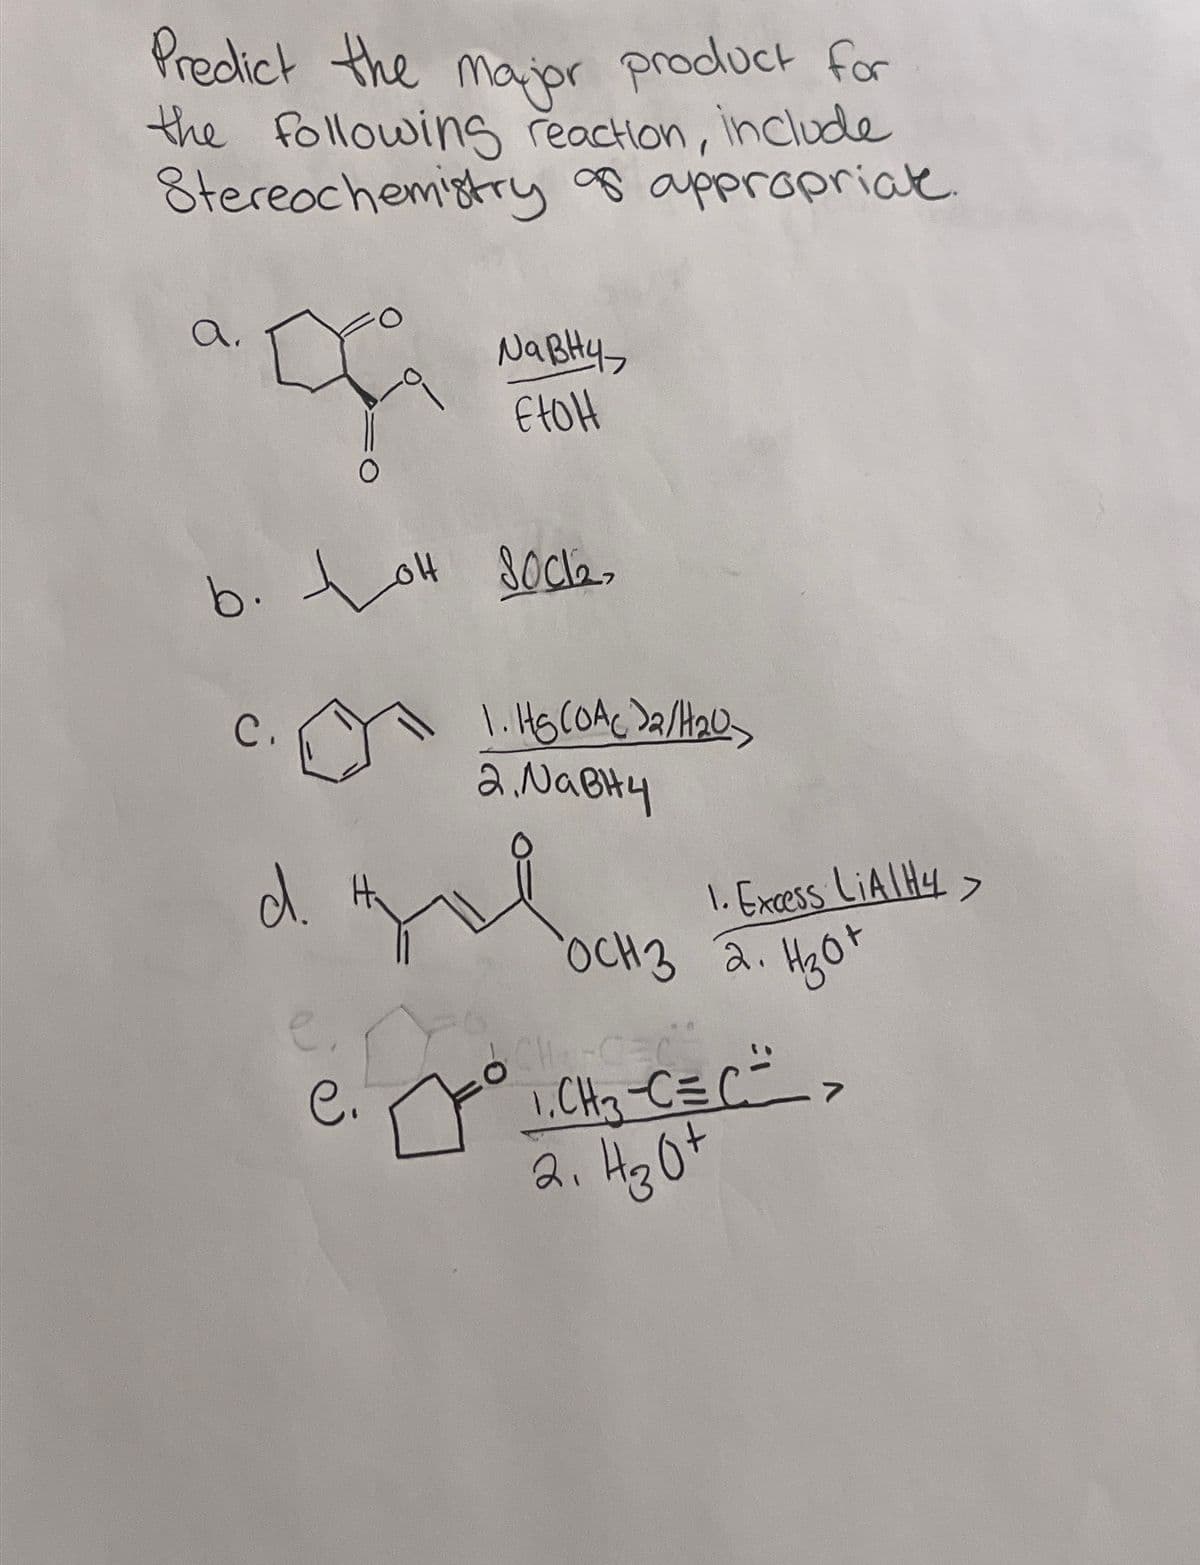 Predict the major product for
the following reaction, include
Stereochemistry of appropriat
a.
NaBH4
EtOH
b. o socke
to
C.
1. HS (OAc)2/H20
2. NaBH4
d.
1. Excess LiAlH4>
OCH 3 2. H3O+
CH-C
e.
C. ° 1. CH₂-C=C =>
2. H30+